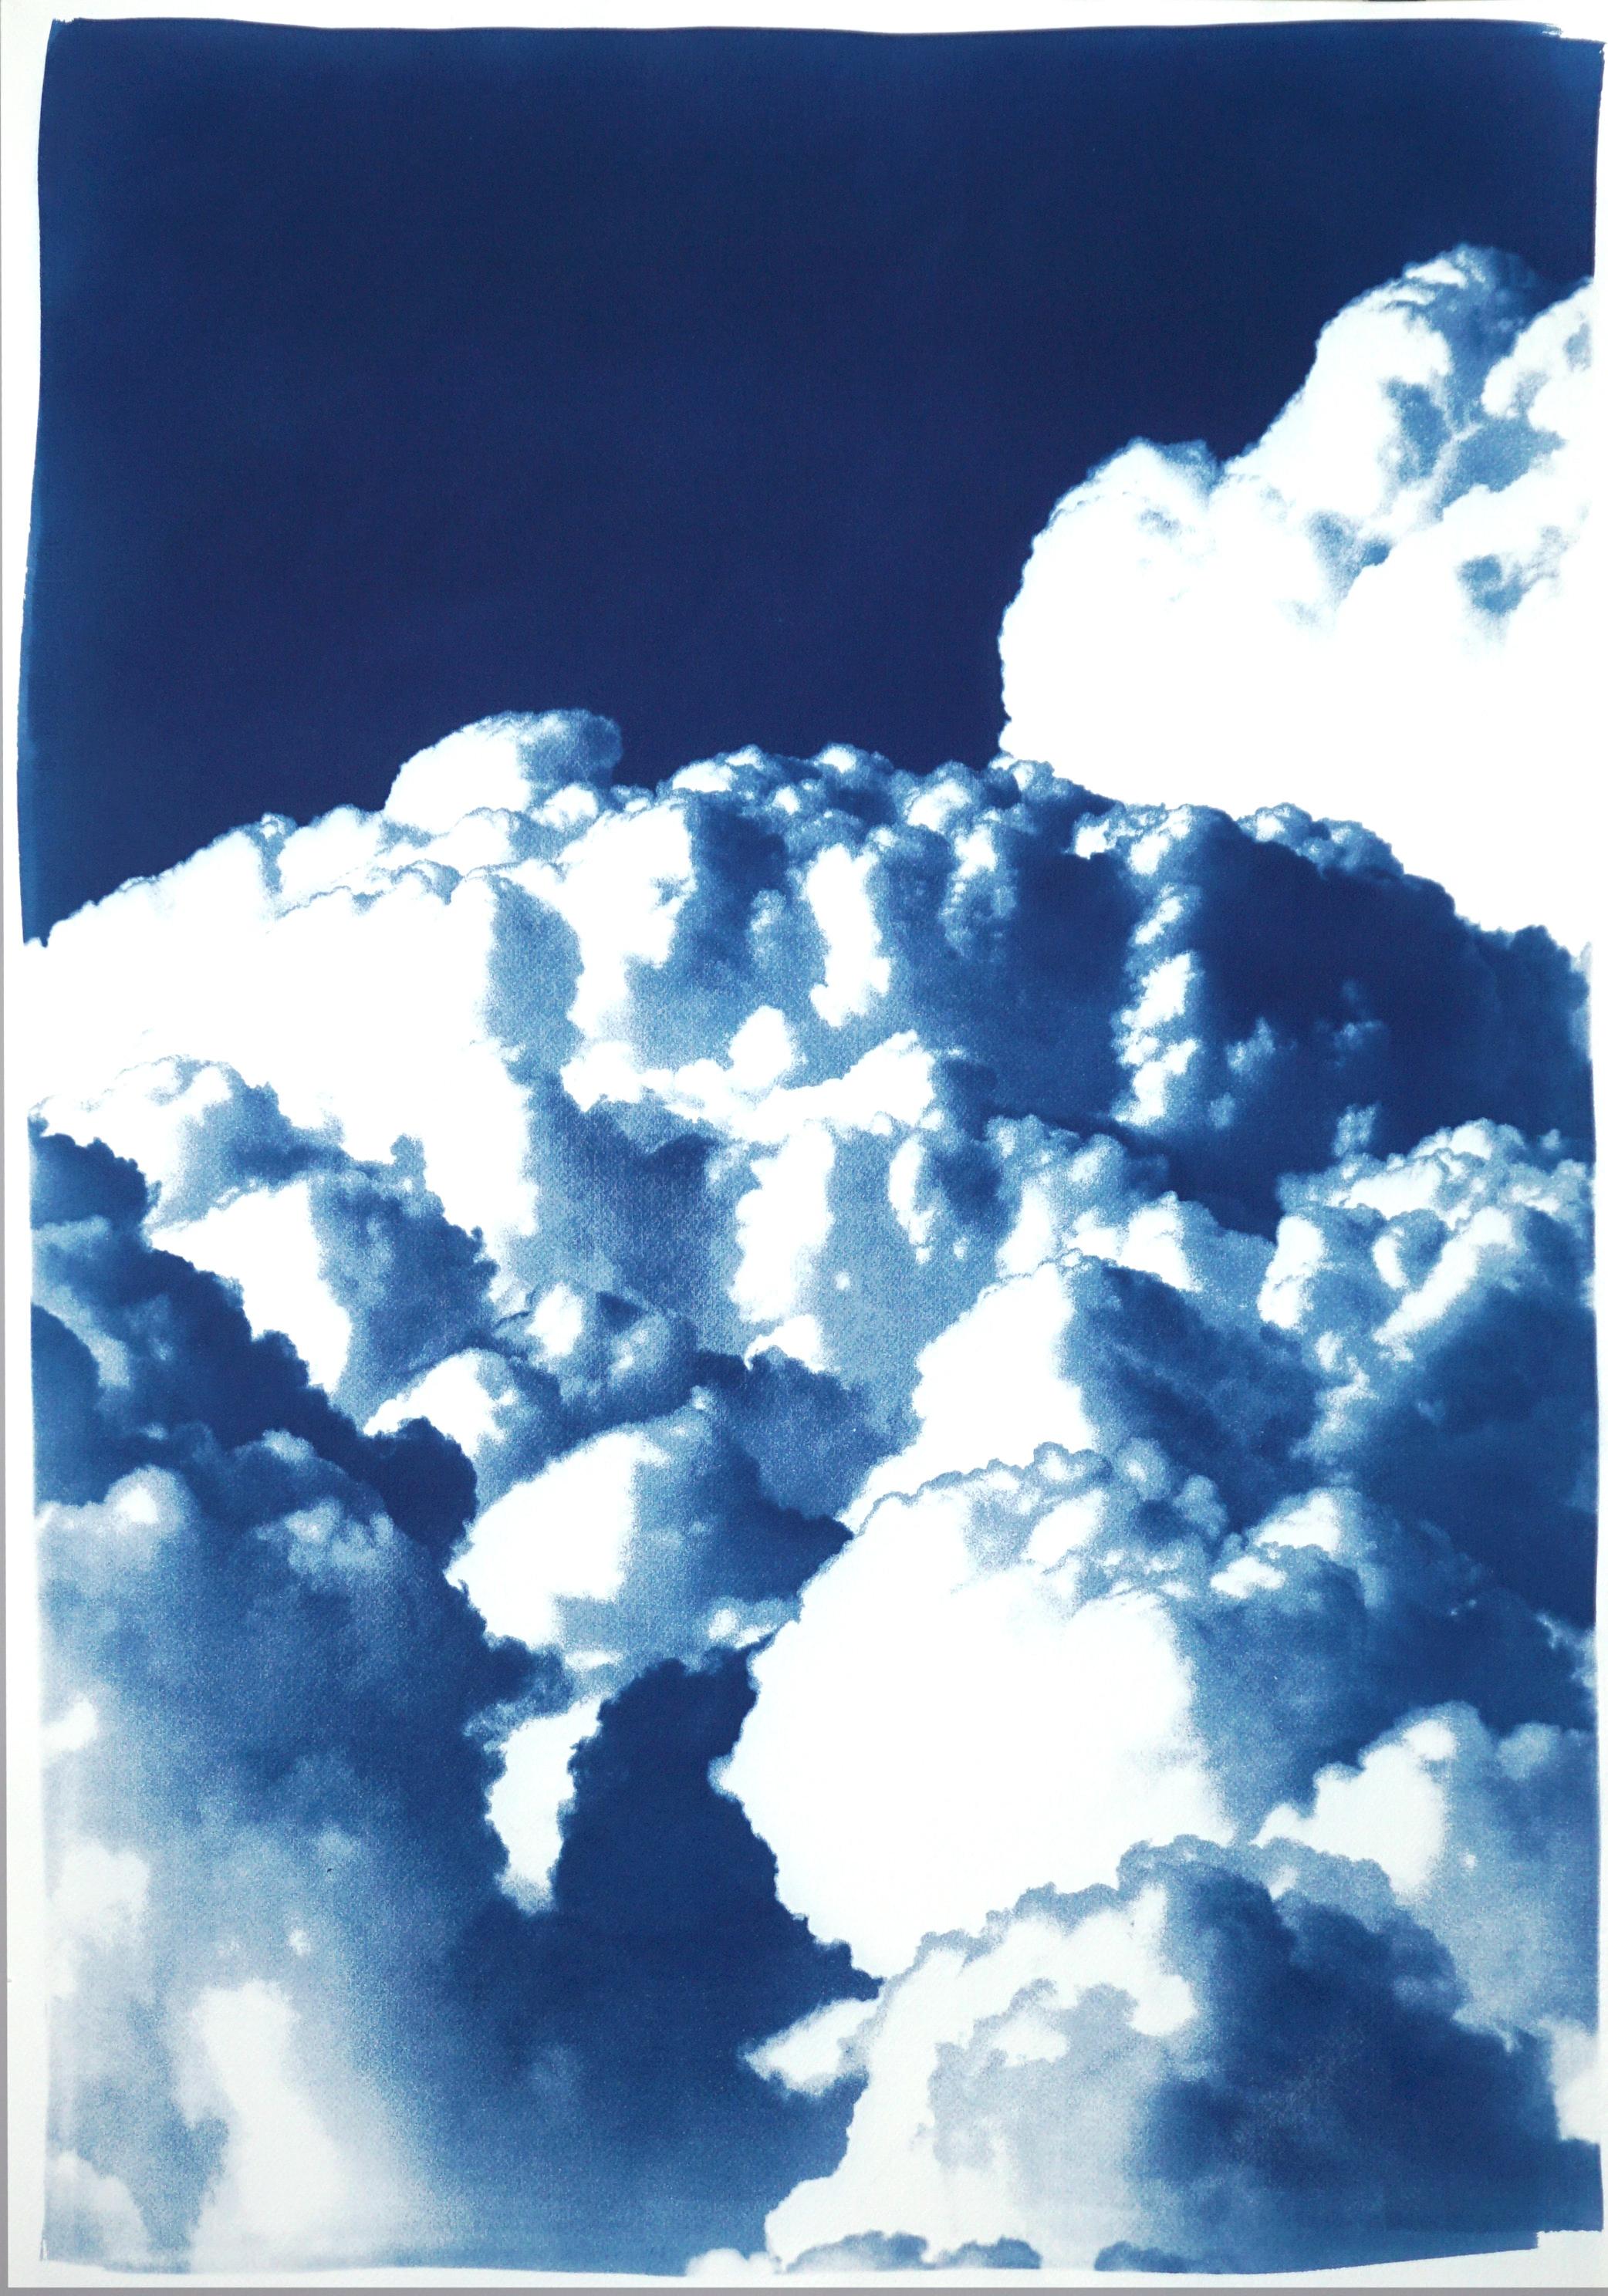 Multipanel Triptych, Serene Gorgeous Clouds, Handmade Cyanotype, Blue and White - American Realist Print by Kind of Cyan